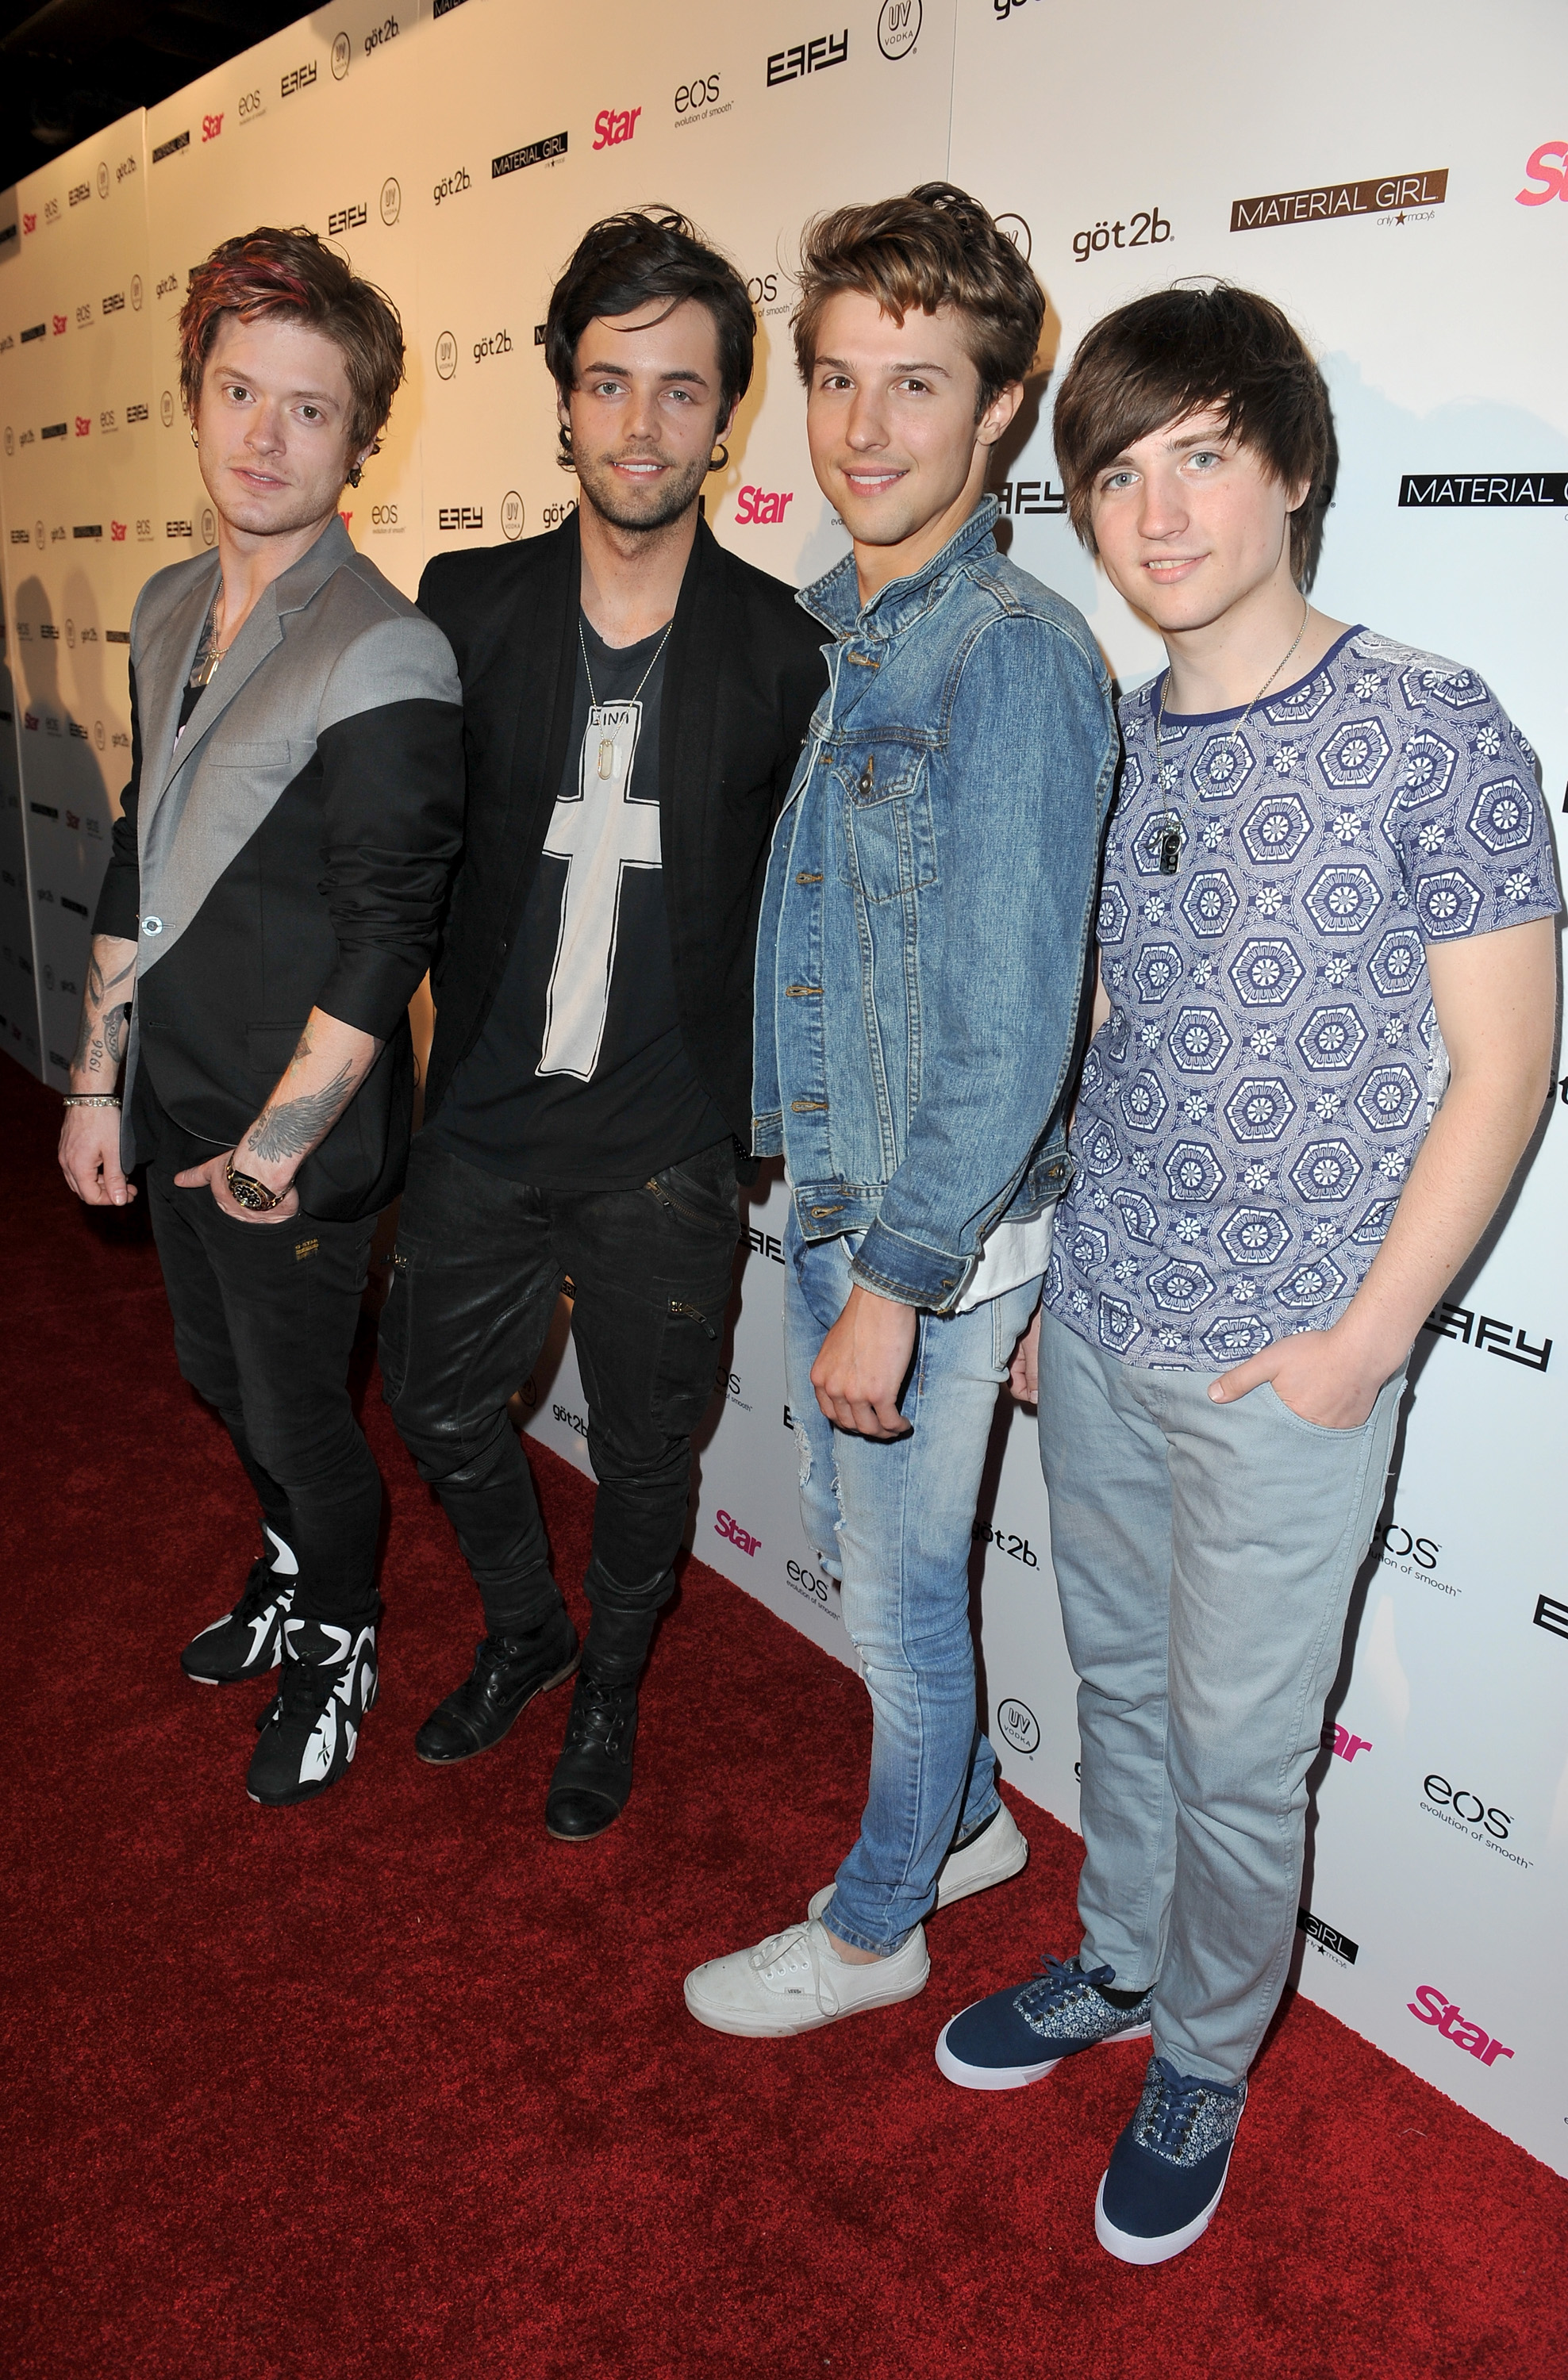 LOS ANGELES, CA - APRIL 04:  Hot Chelle Rae (L-R)  Nash Overstreet, Ian Keaggy, Ryan Folles and Jamie Folles attend Star Magazine's Hollywood Rocks event held at Playhouse Hollywood on April 4, 2013 in Los Angeles, California.  (Photo by Angela Weiss/WireImage)